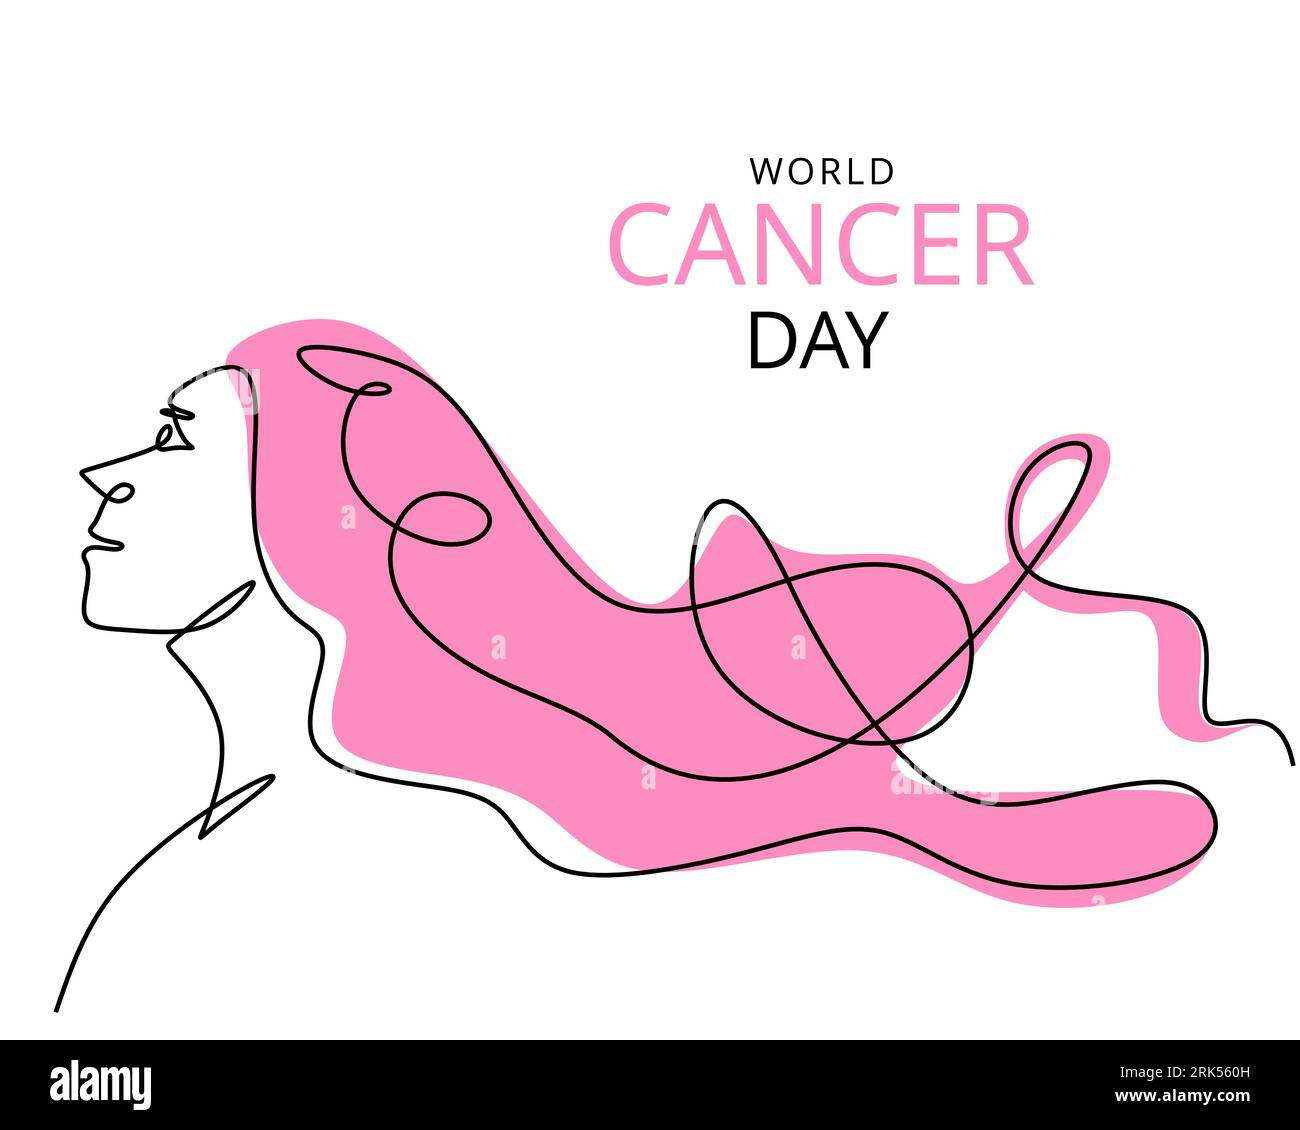 One single line of cancer day background isolated on white background. Stock Vector